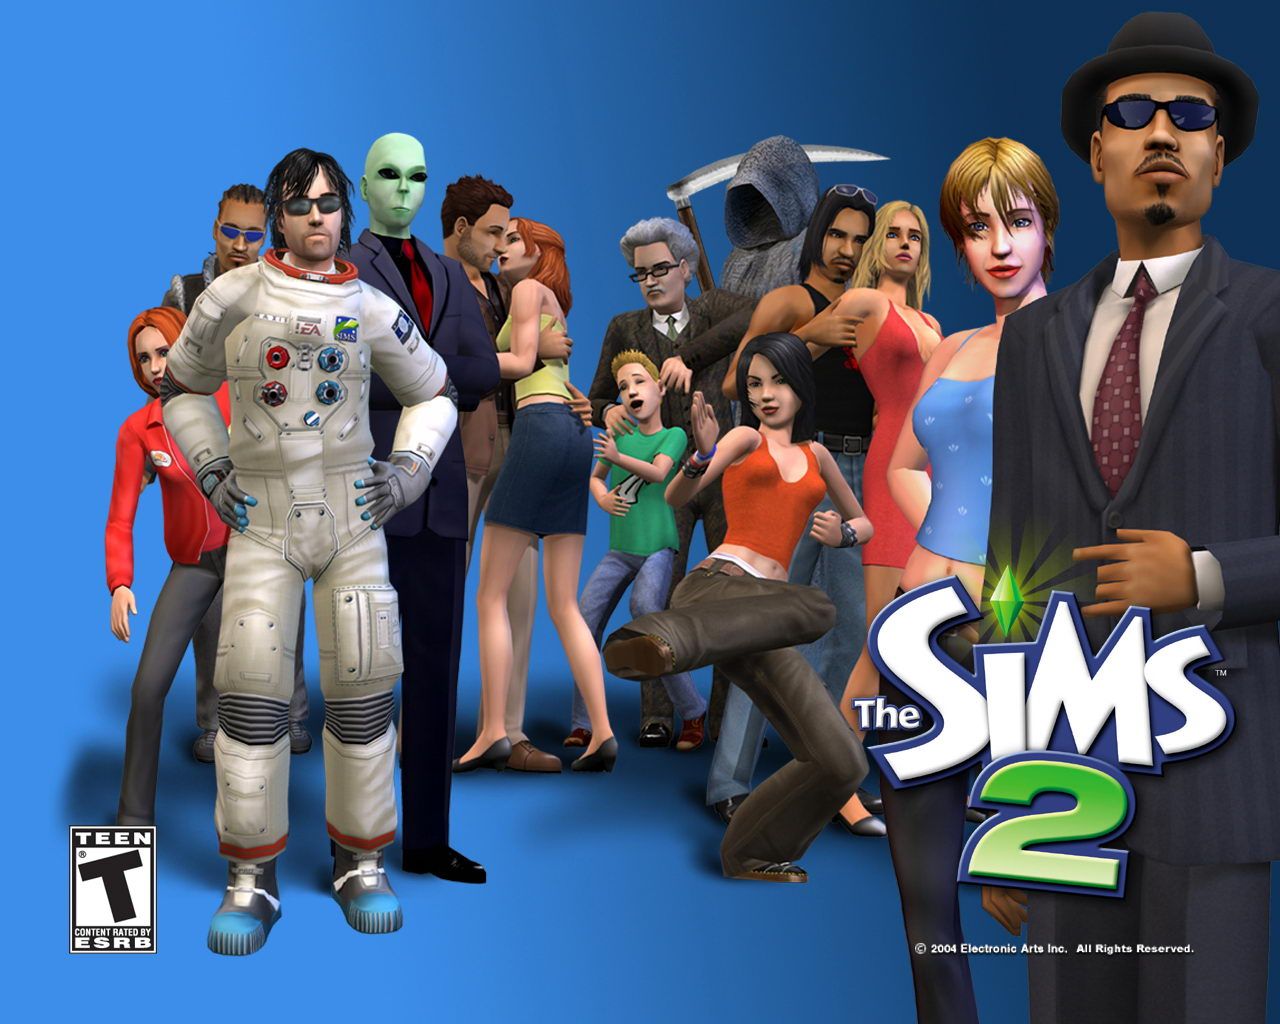 Sims2 poster